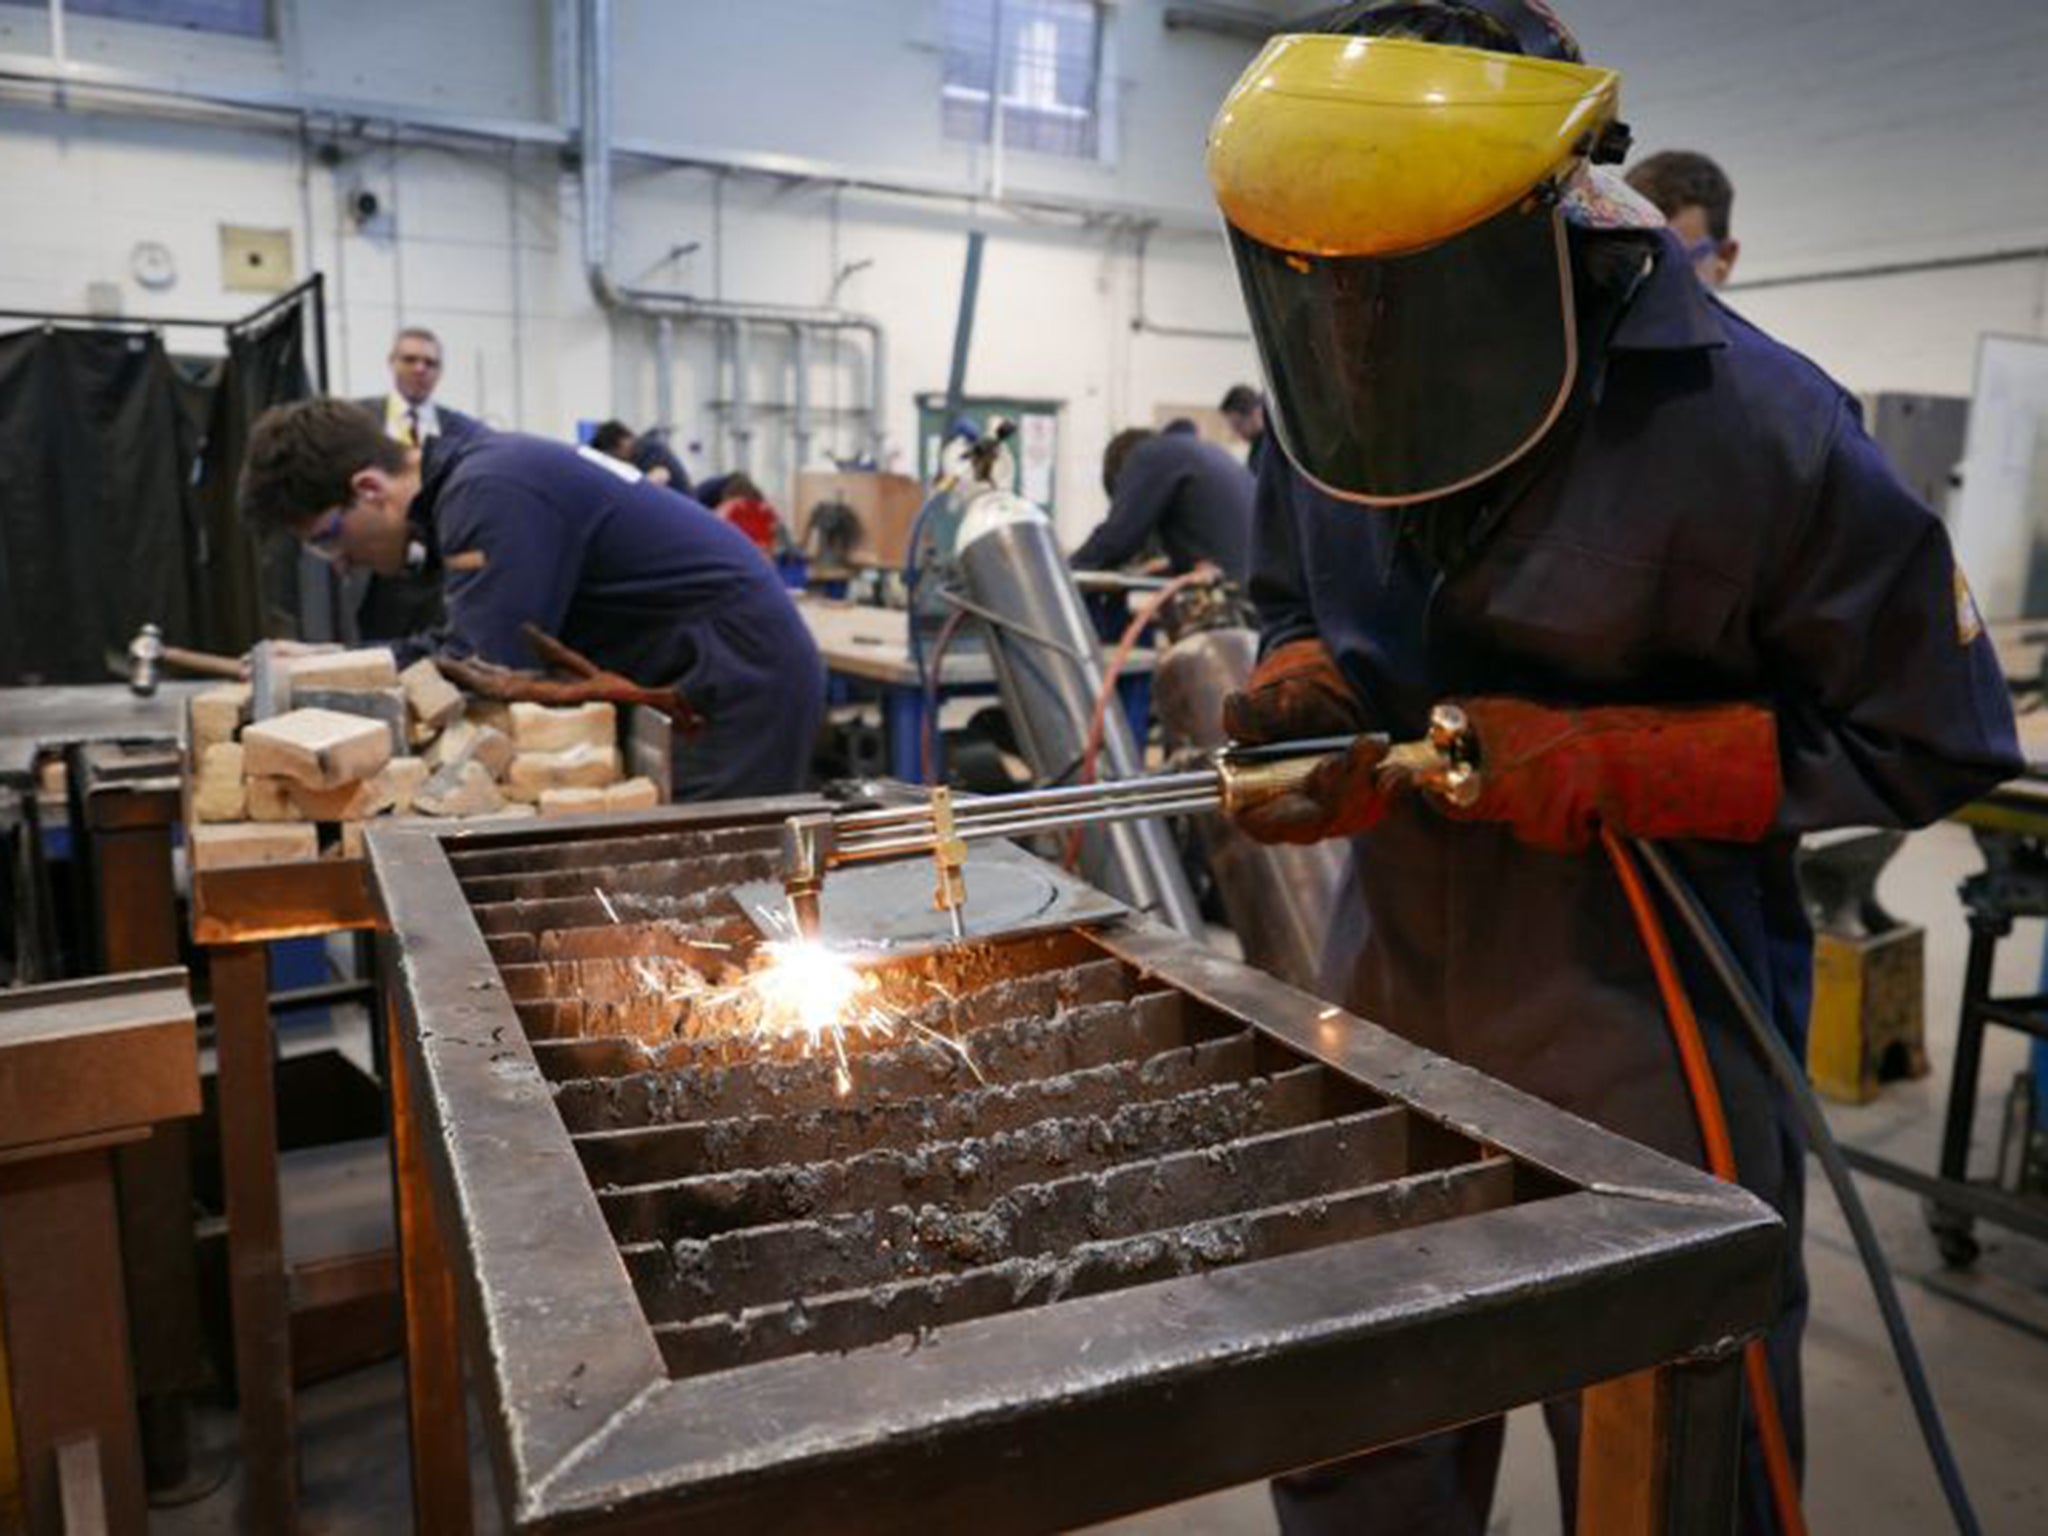 Manufacturing output figures from the Office for National Statistics showed a 0.5 per cent expansion in industrial output in March